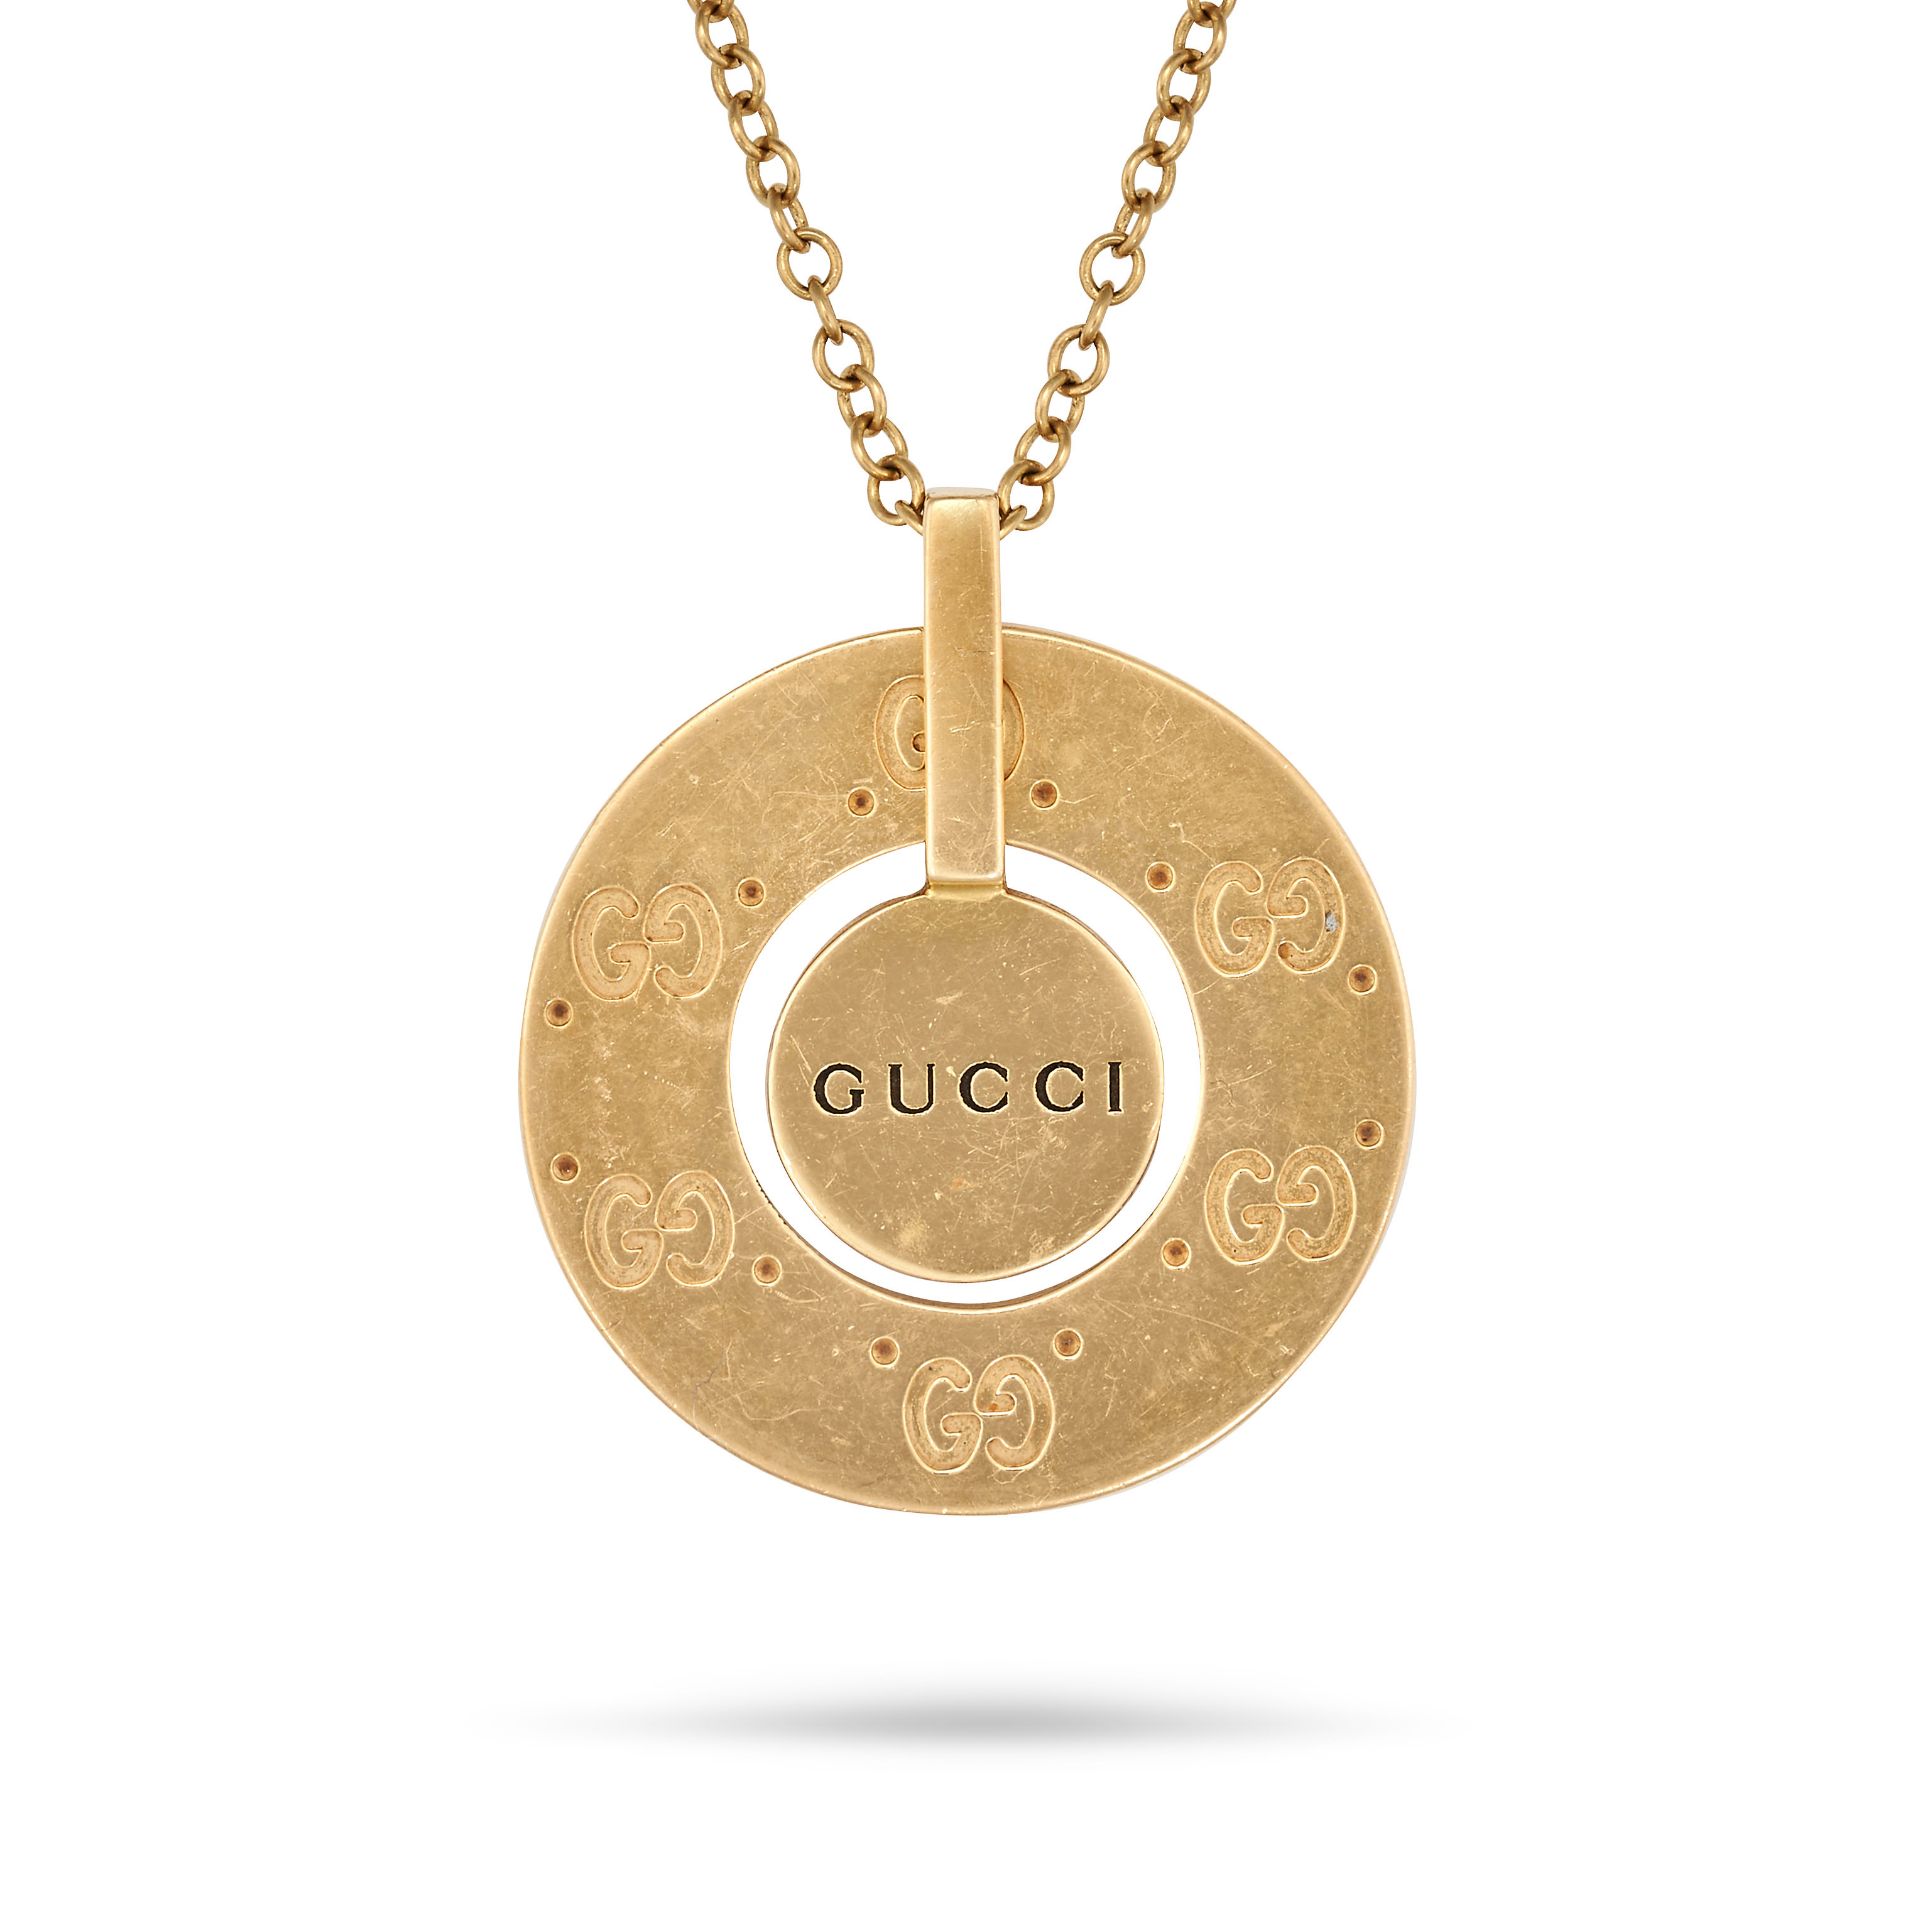 GUCCI, A LOGO NECKLACE in 18ct yellow gold, comprising a medallion engraved with the double G Guc...